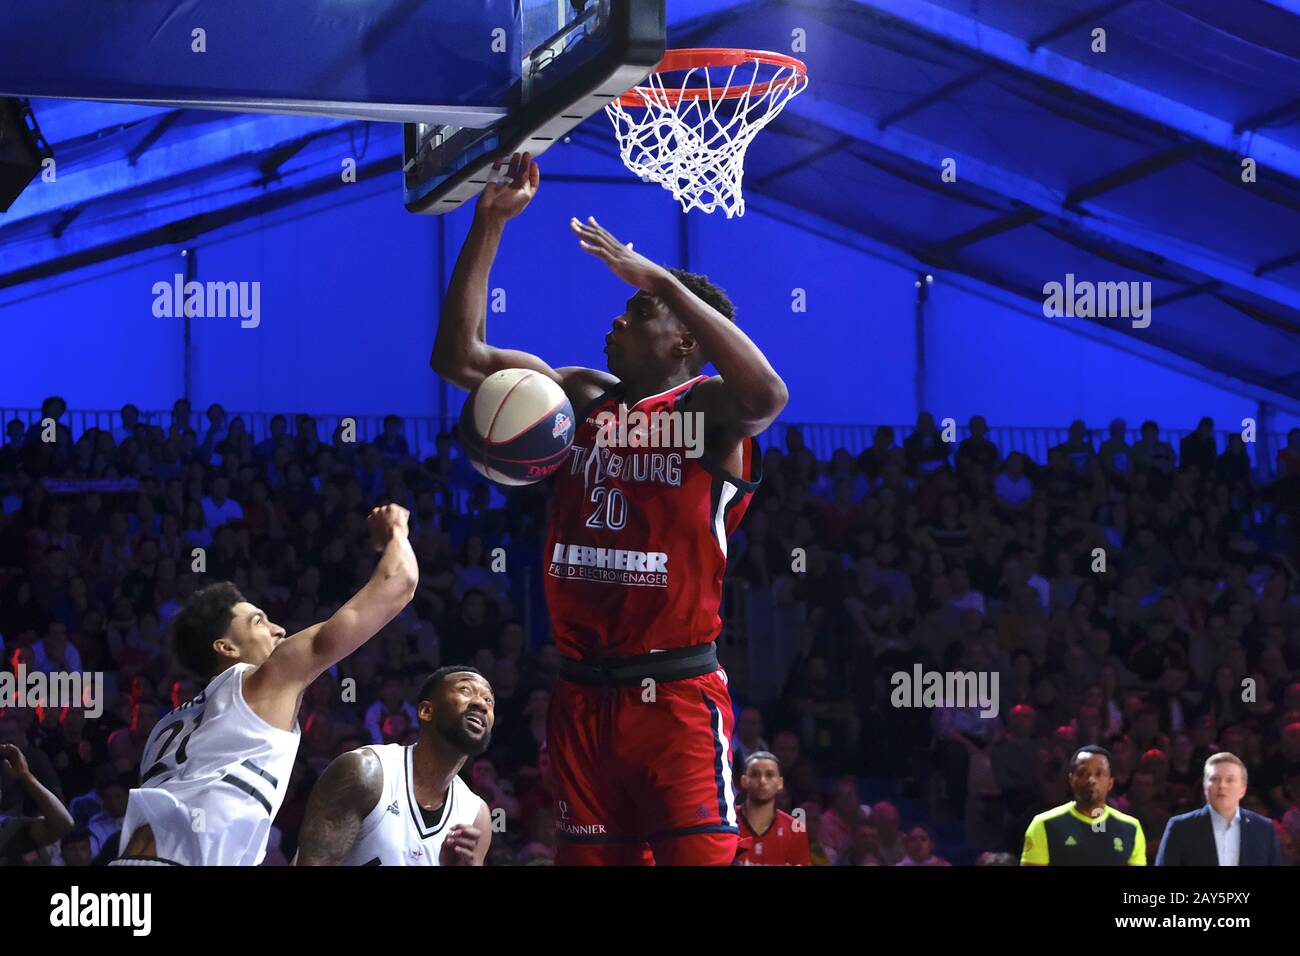 Marne La Vallee, Seine et Marne, France. 14th Feb, 2020. Strasbourg player ESSOME MIYEM in action during the LNB Basket Leaders Cup quarterfinal ASVEL against Strasbourg at the Disney Events Arena in Paris - France.ASVEL won 91-72 Credit: Pierre Stevenin/ZUMA Wire/Alamy Live News Stock Photo